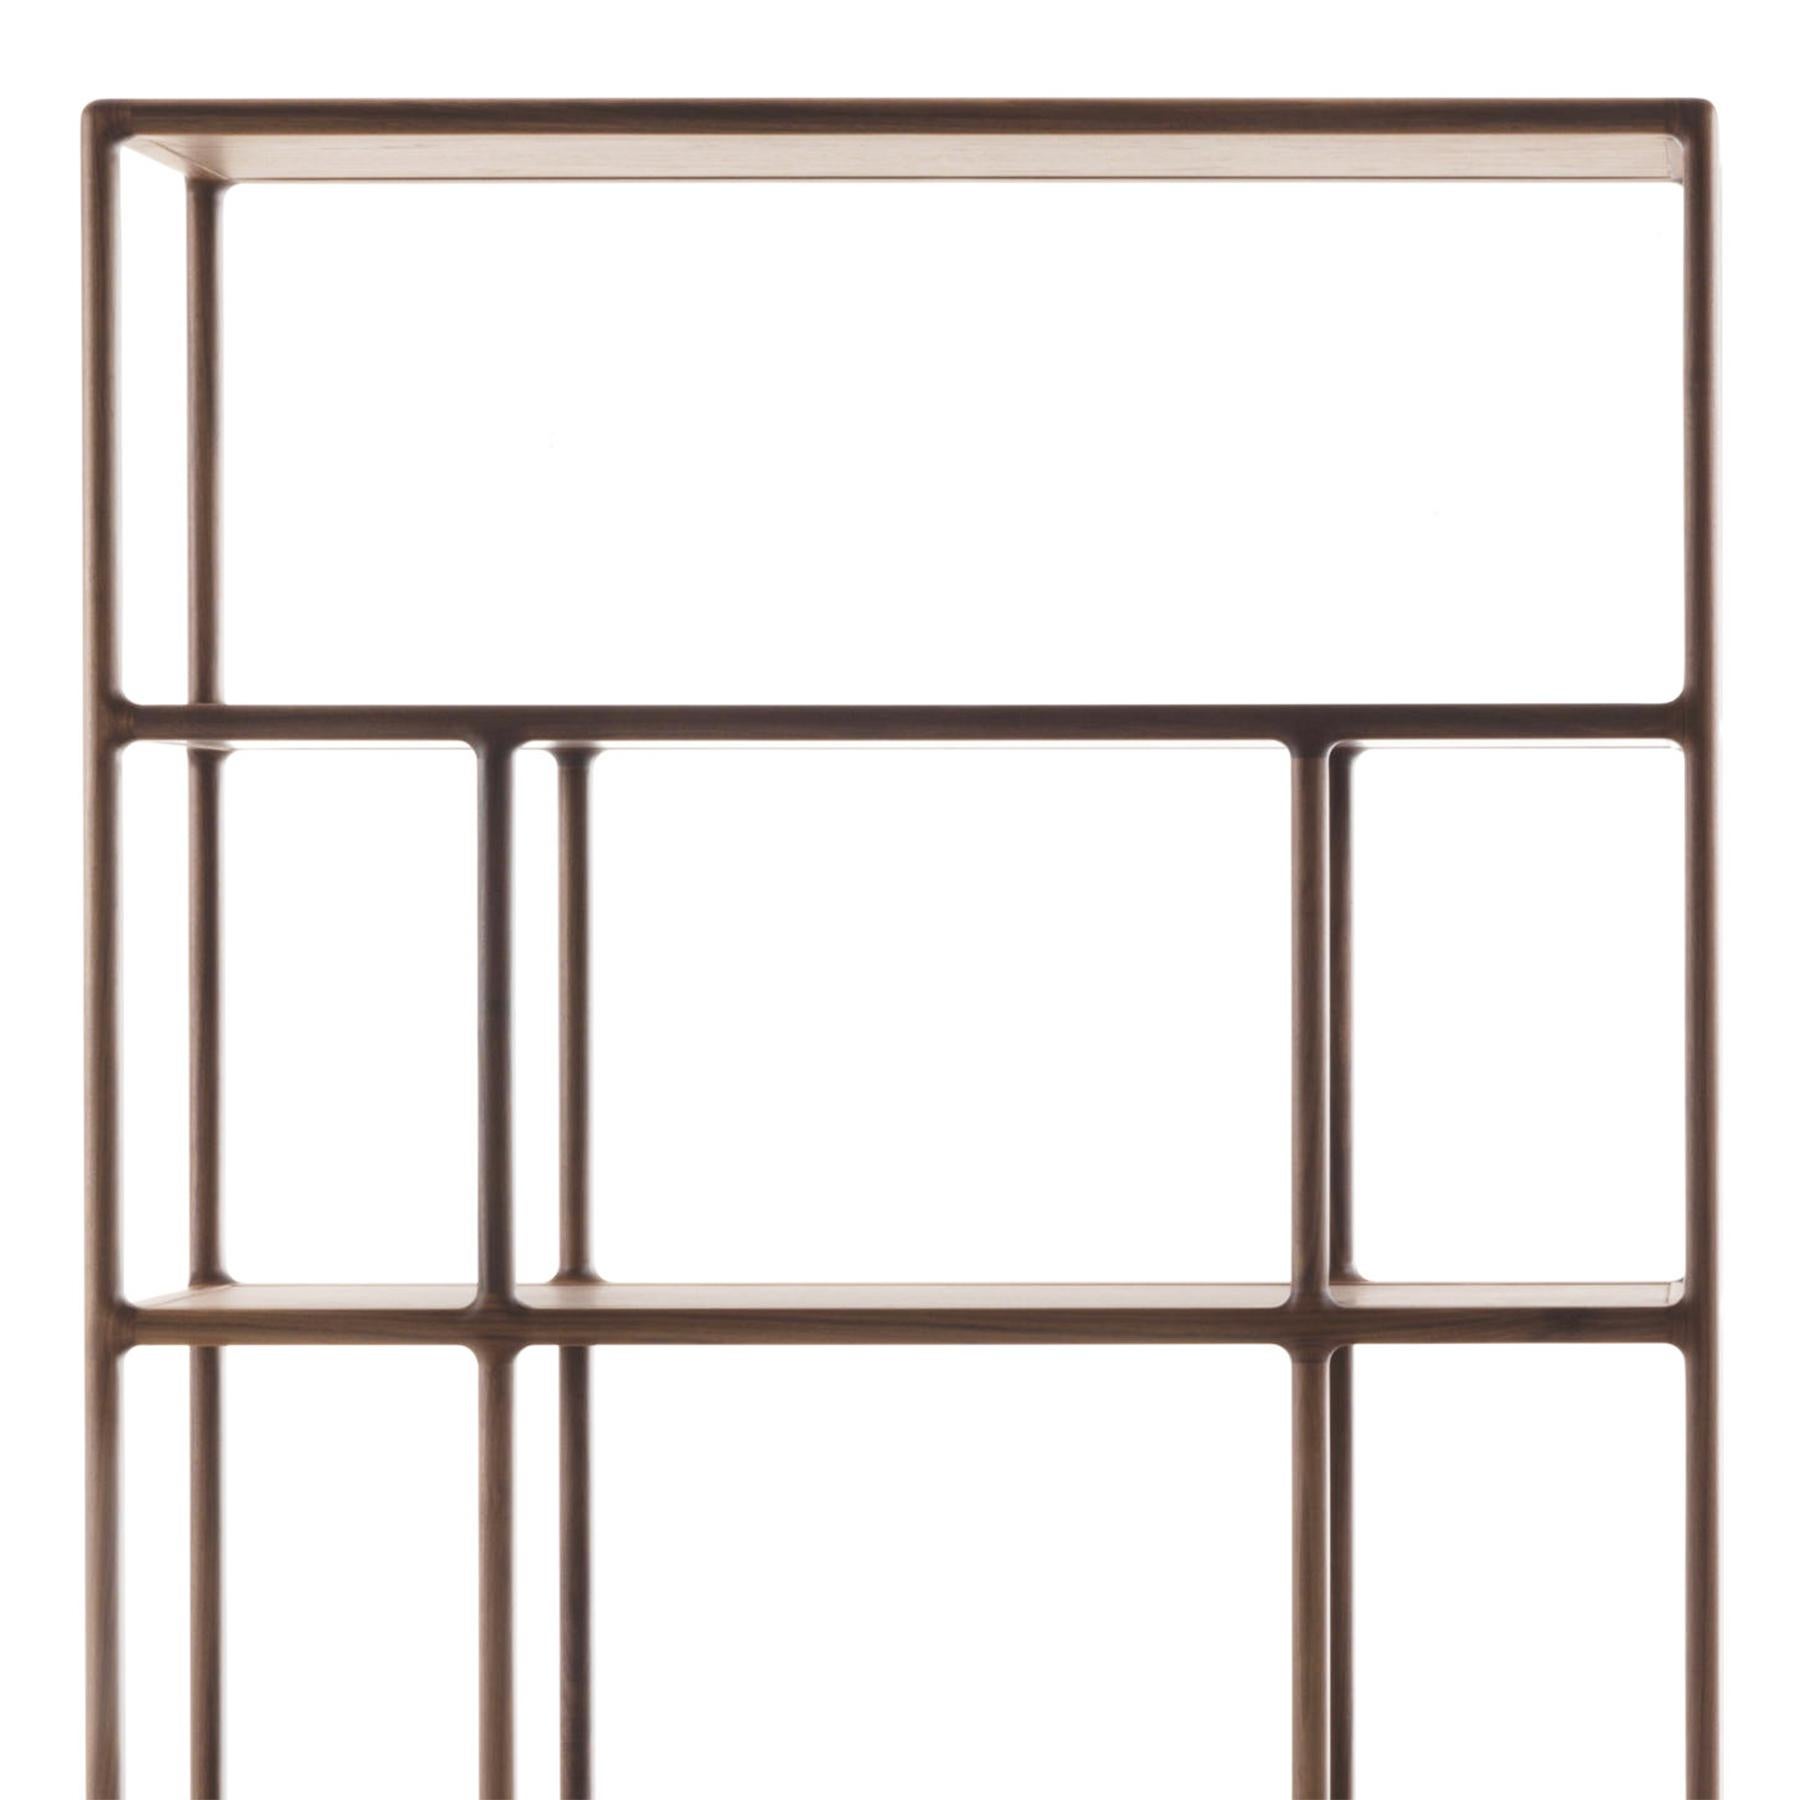 Bookcase Wilson with structure in solid walnut
 in natural walnut wood finish. Shelves top are
in natural walnut wood finish. With adjustable
solid brass feet.